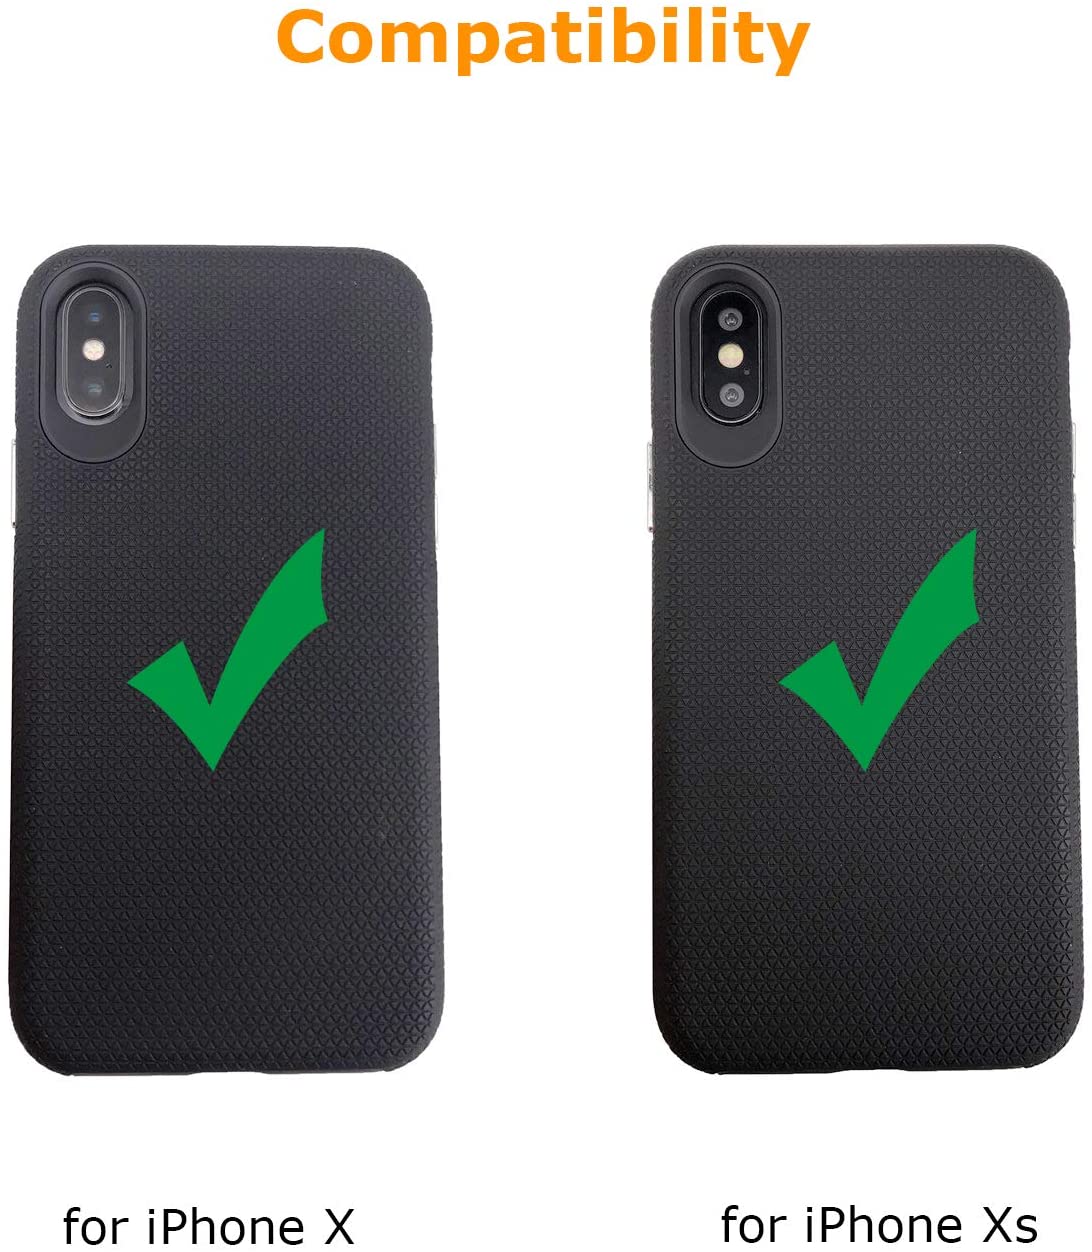 Molzar Shield Series iPhone Xs Case, iPhone X Case, Triangle Texture Grip Case - Molzar-iphone cases and accessories